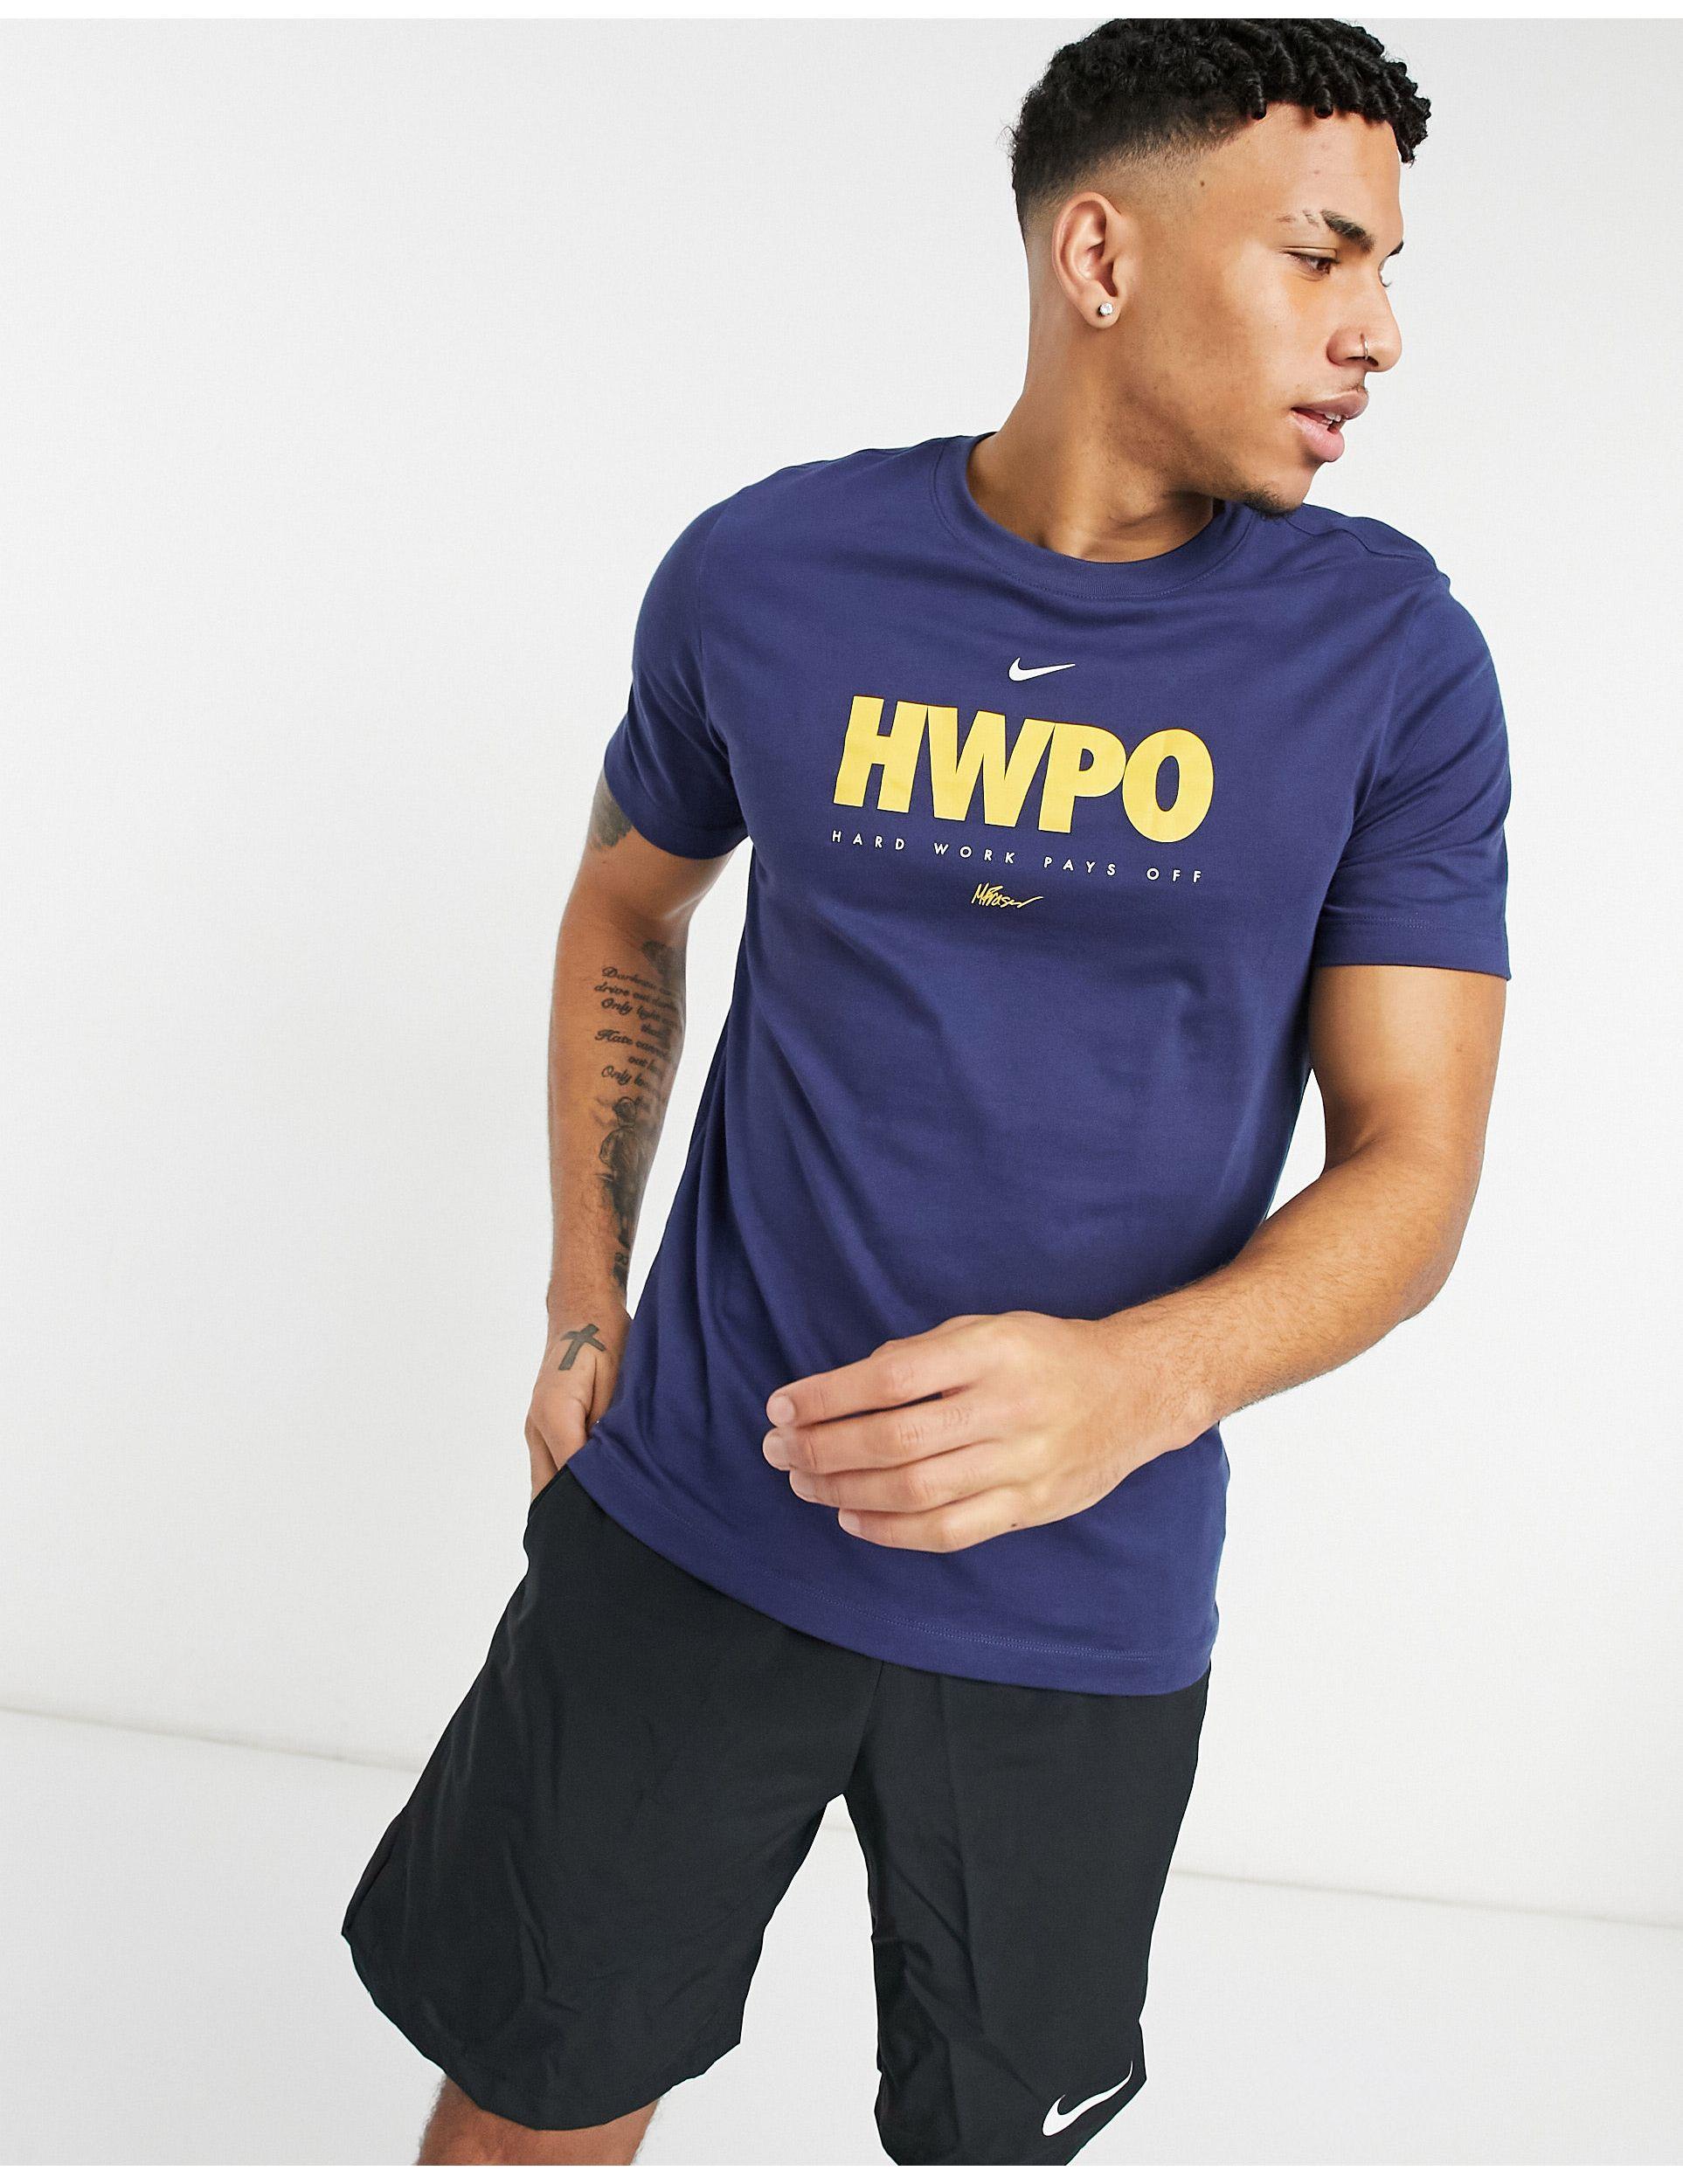 Nike Hwpo Graphic T-shirt in Navy (Blue) for Men - Lyst